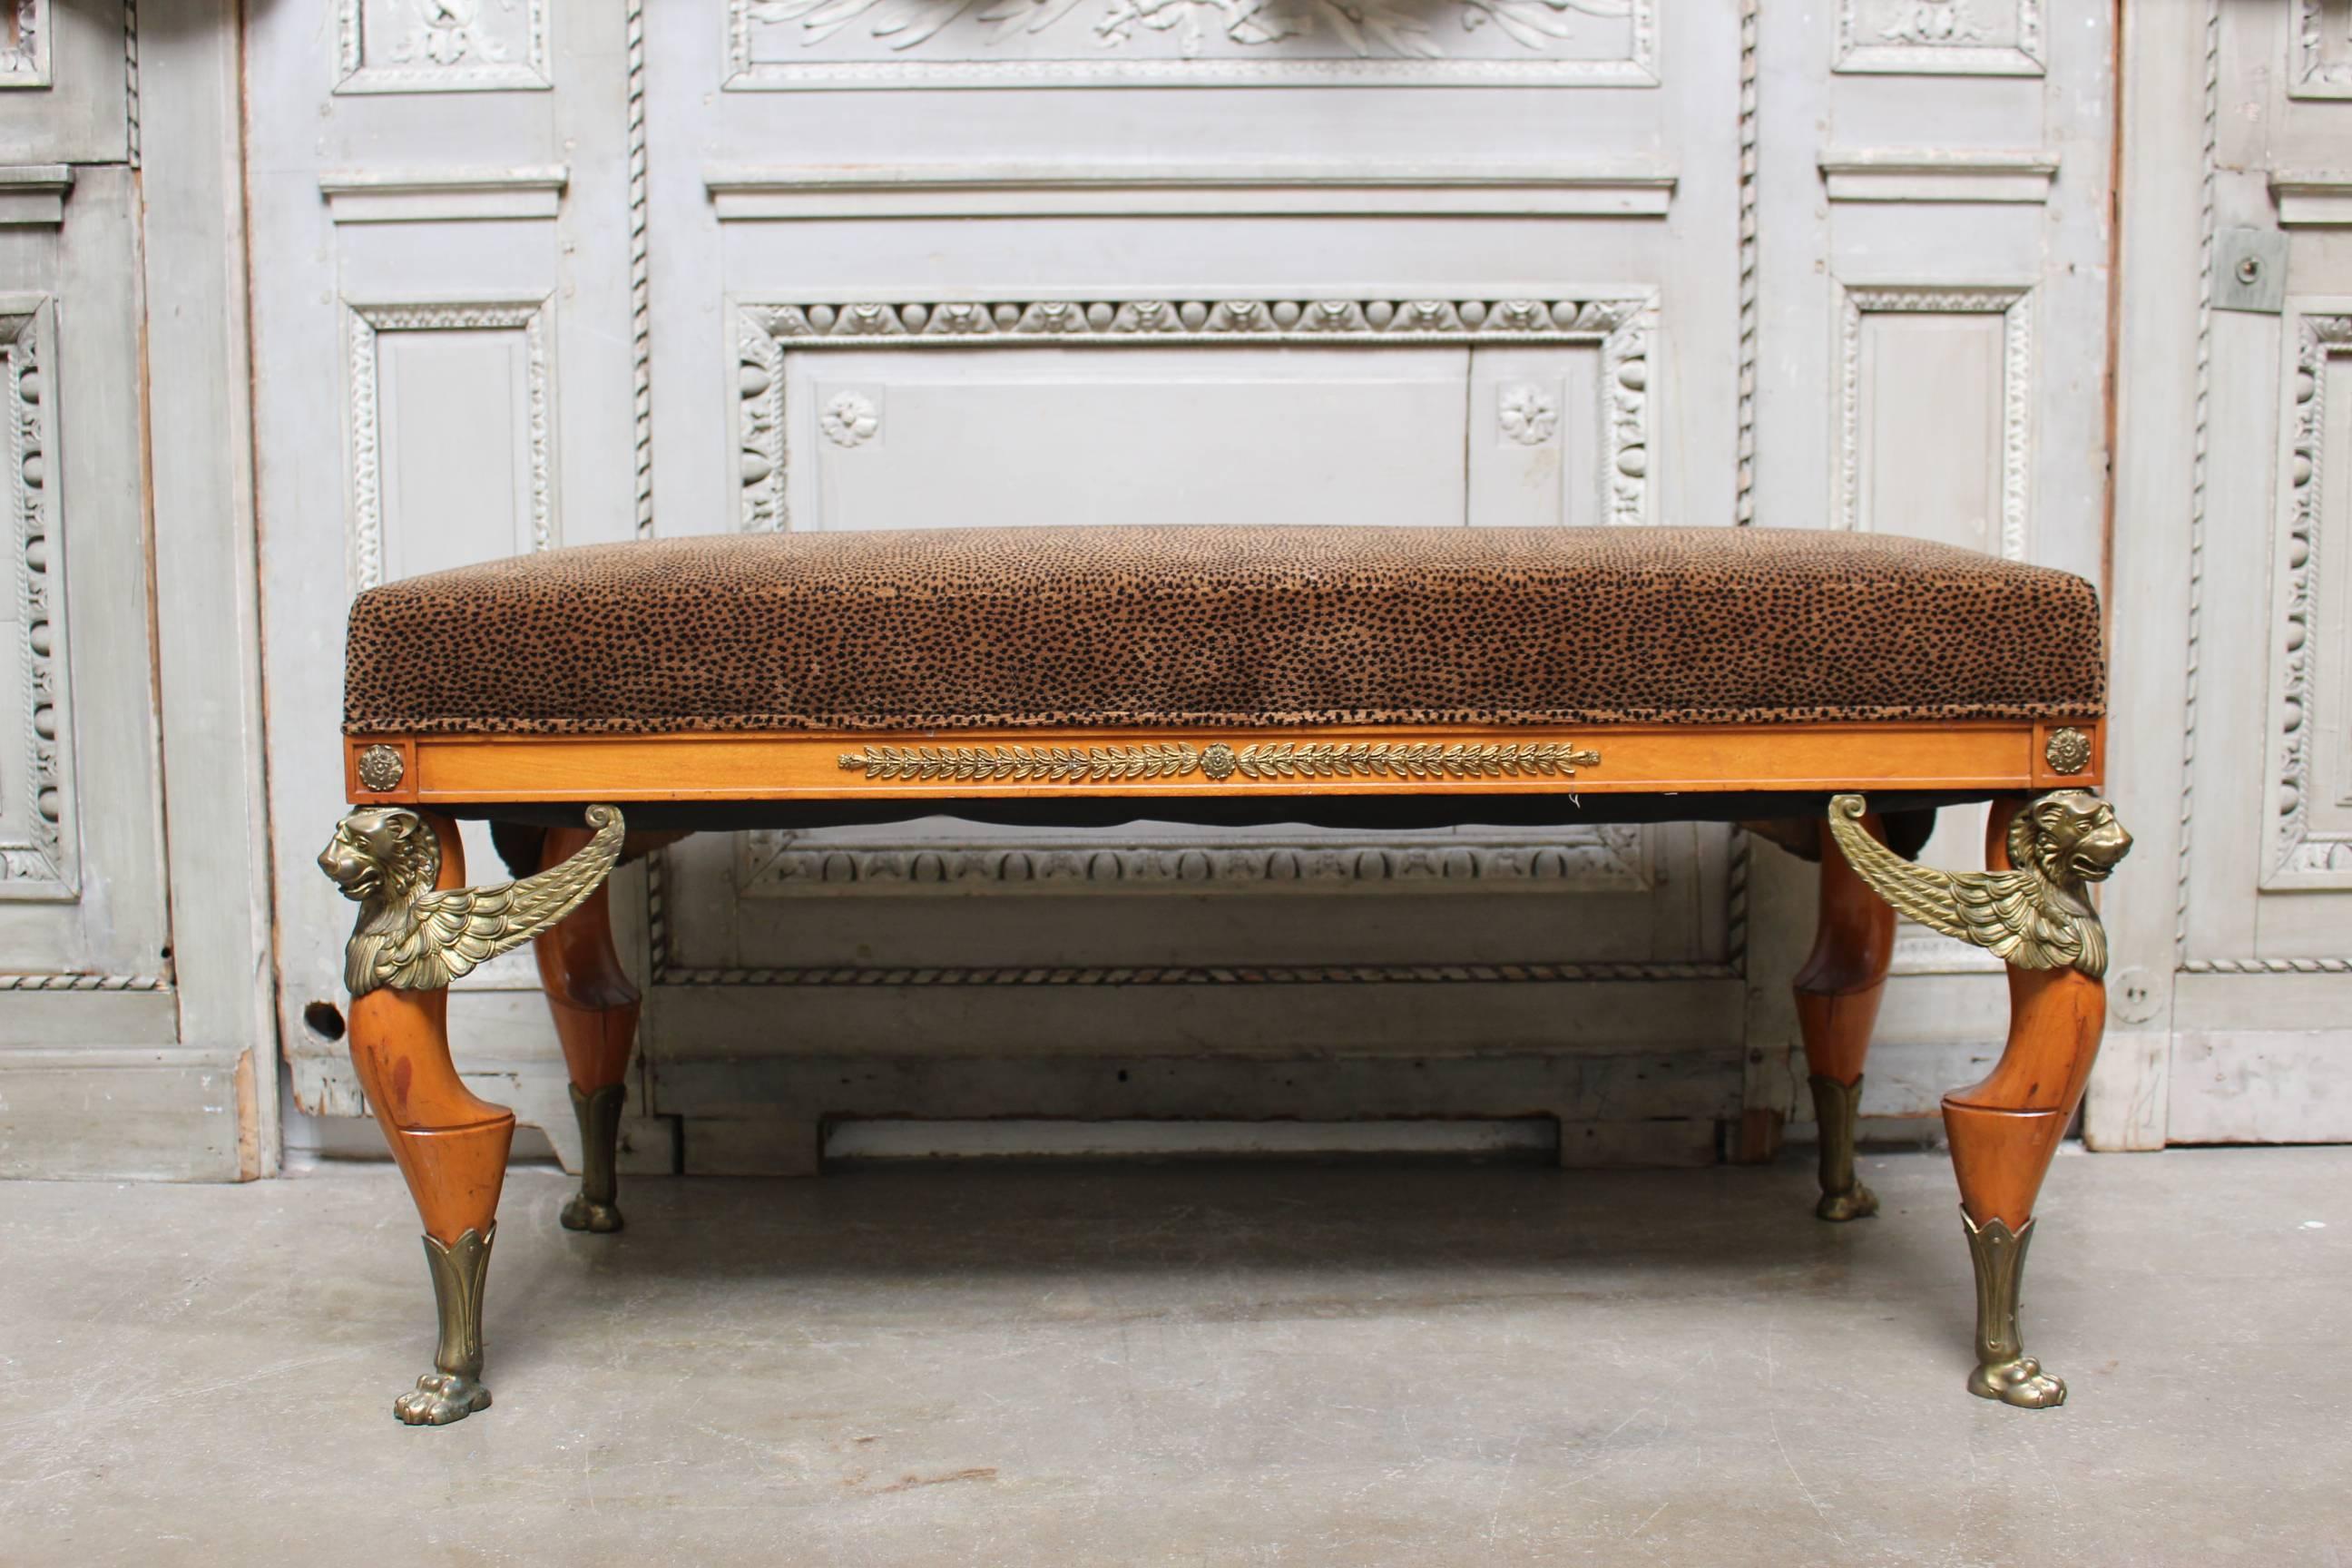 A French Embree style mahogany and bronze baquette bench.